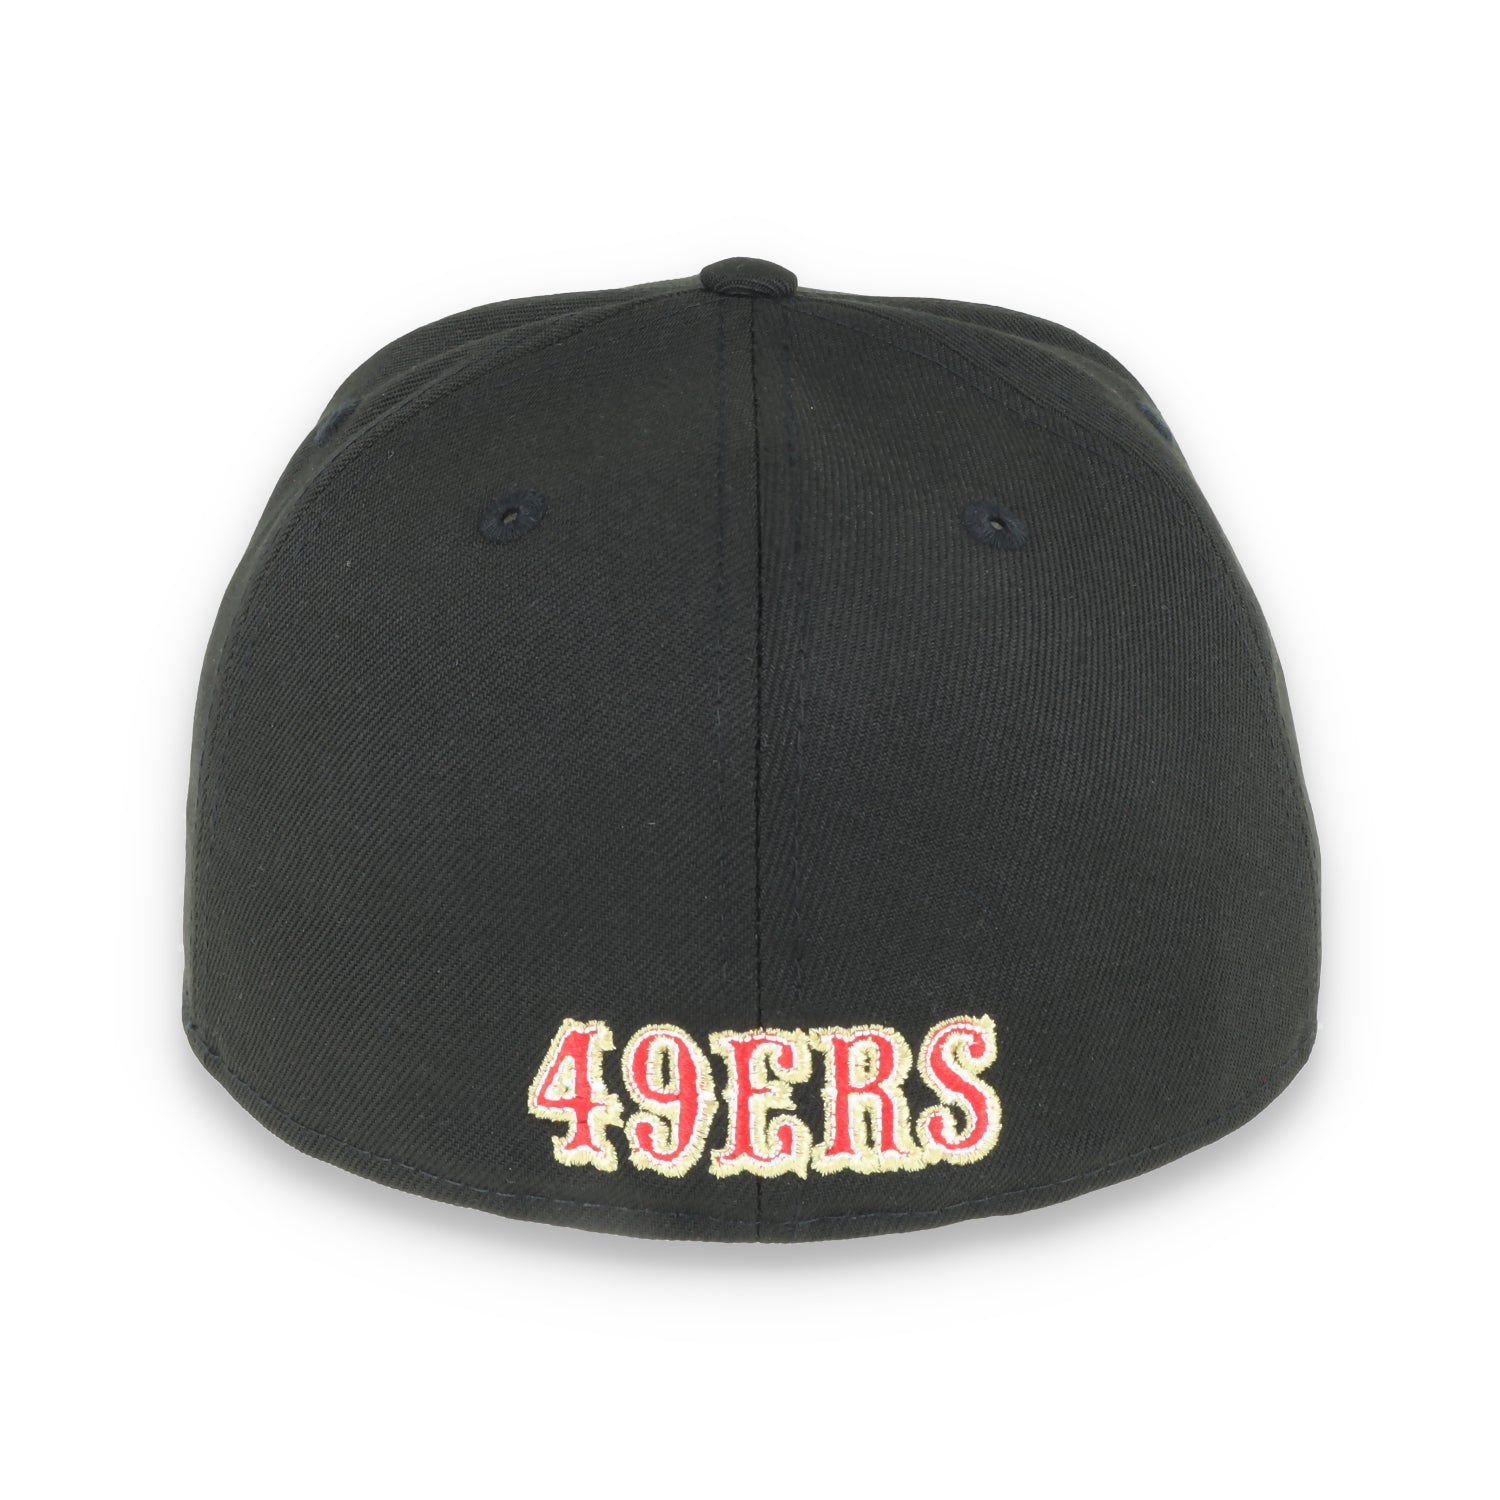 Exclusive San Francisco 49ers  Official 59FIFTY Fitted -BLACK/SCARLET